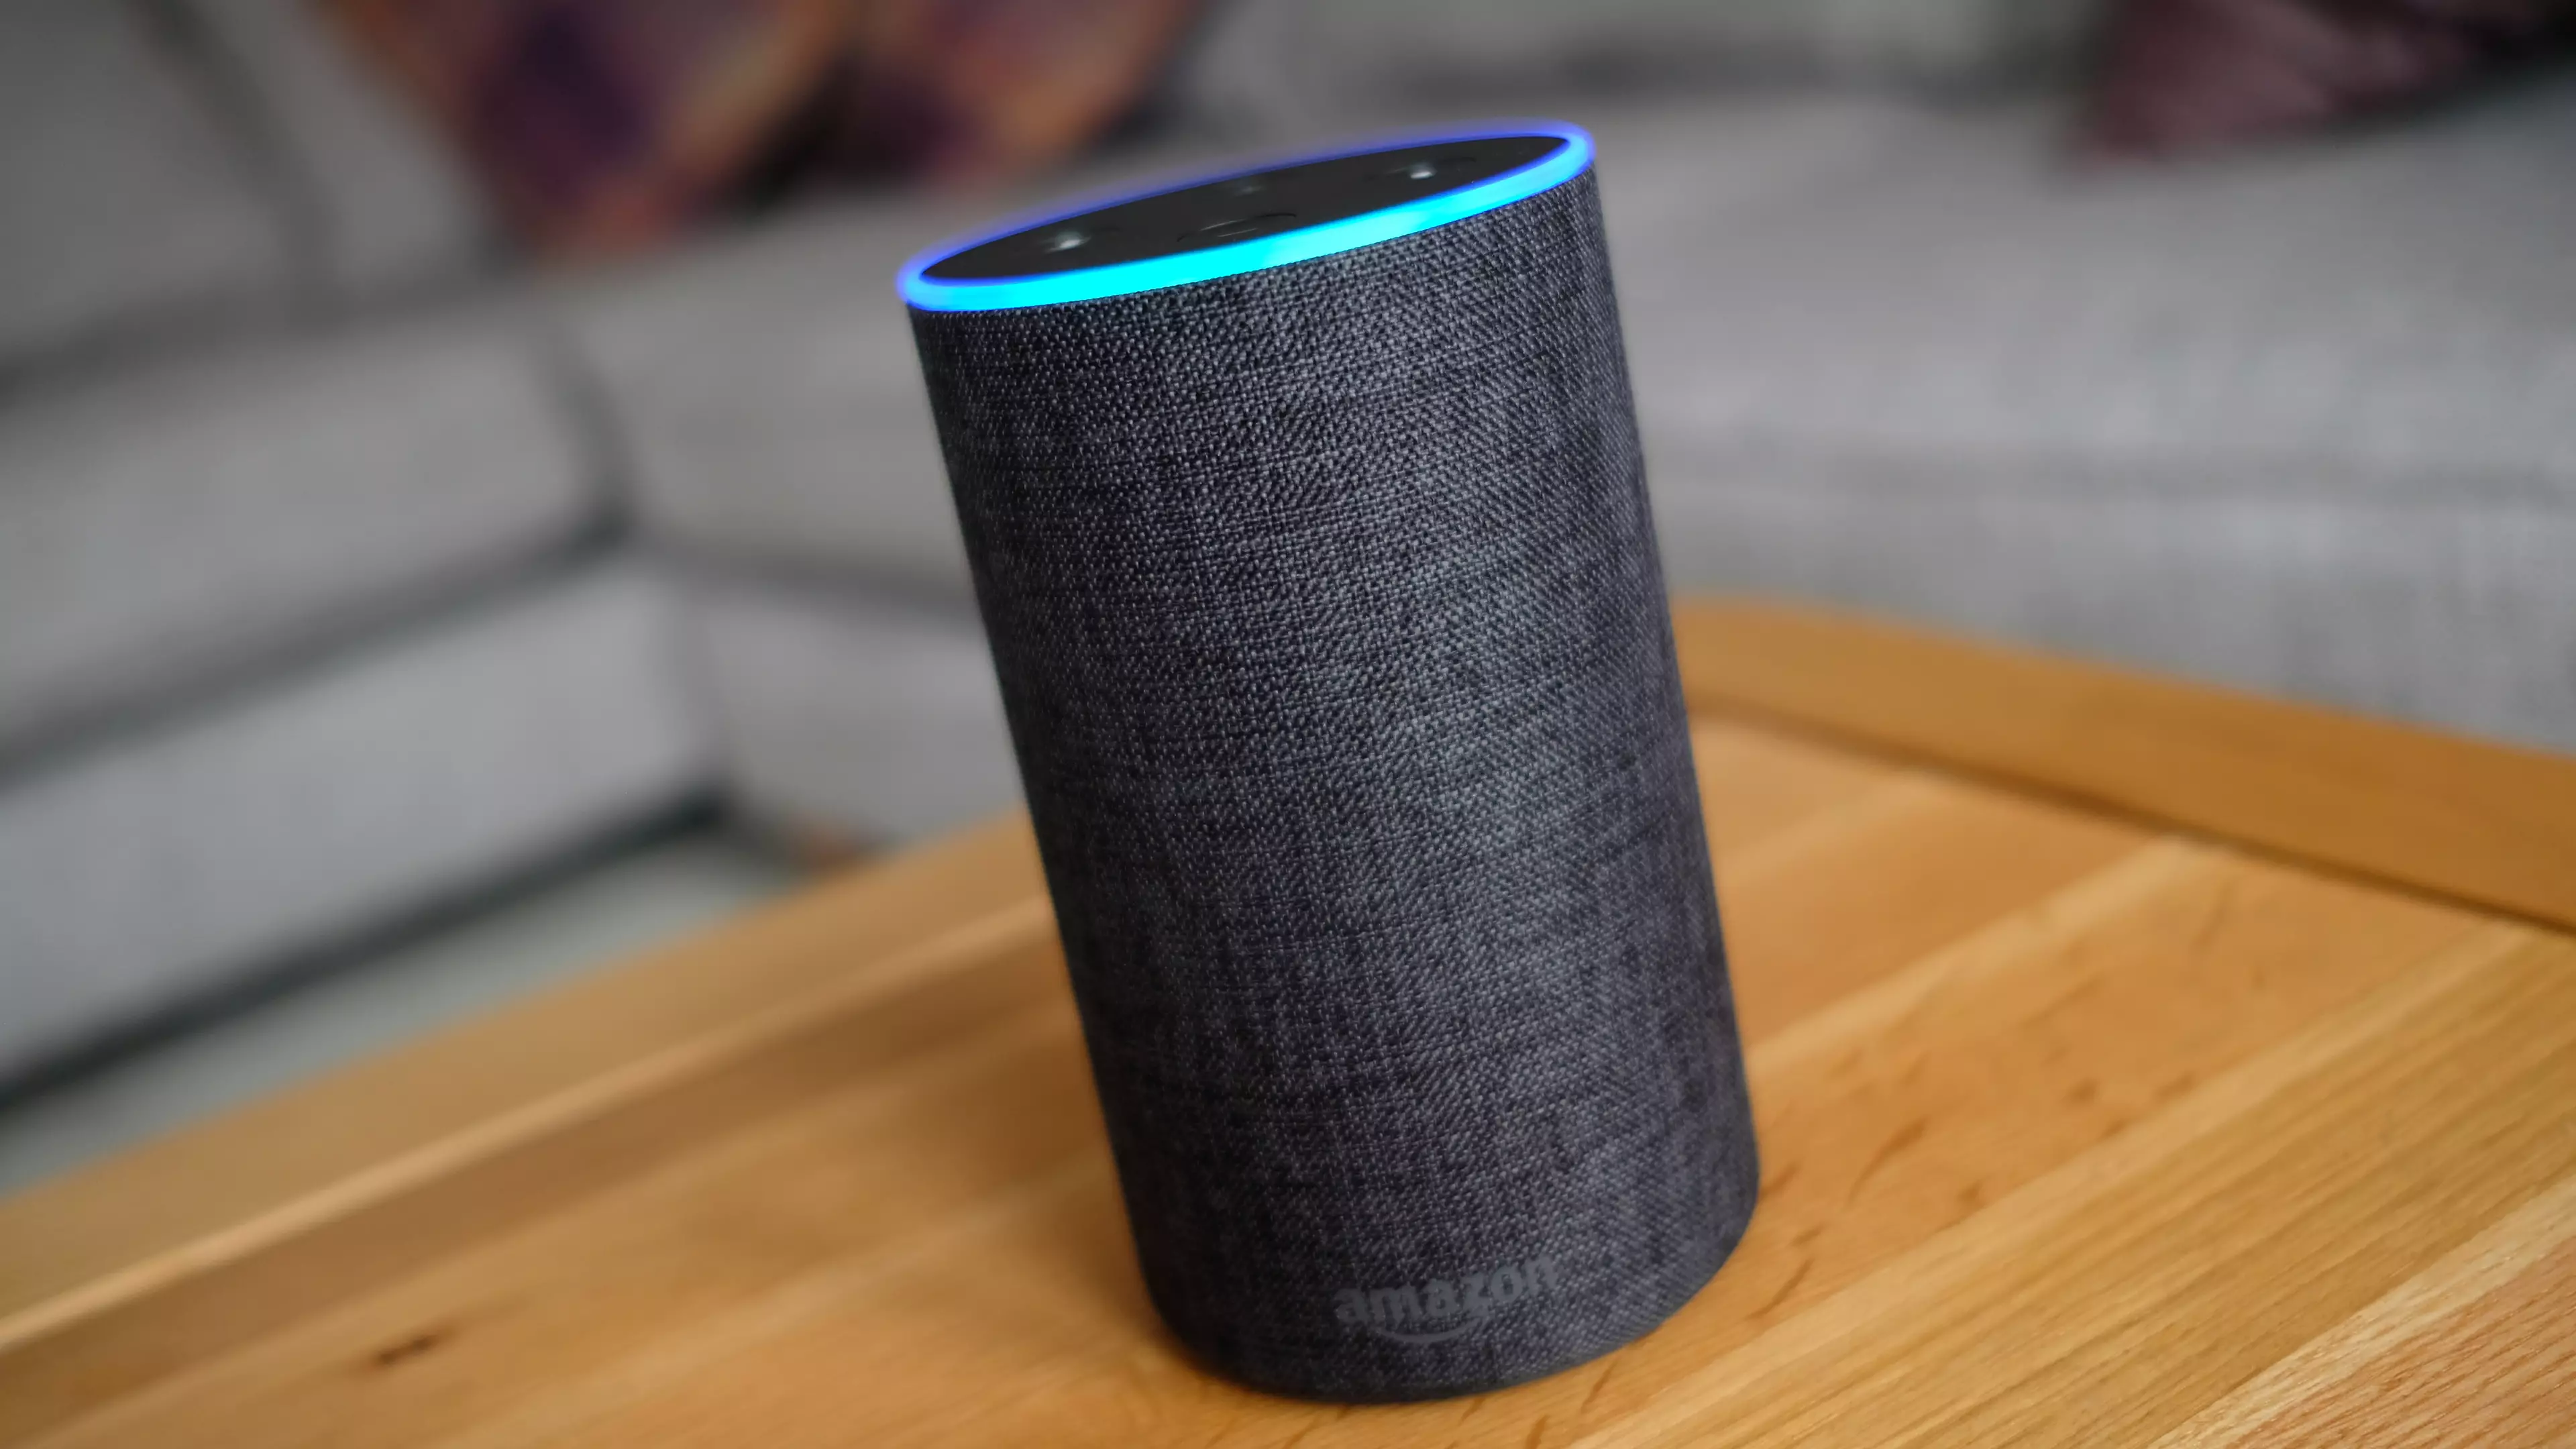 Mum Writes To Amazon CEO Because Her Daughter Alexa Gets Bullied For Her Name